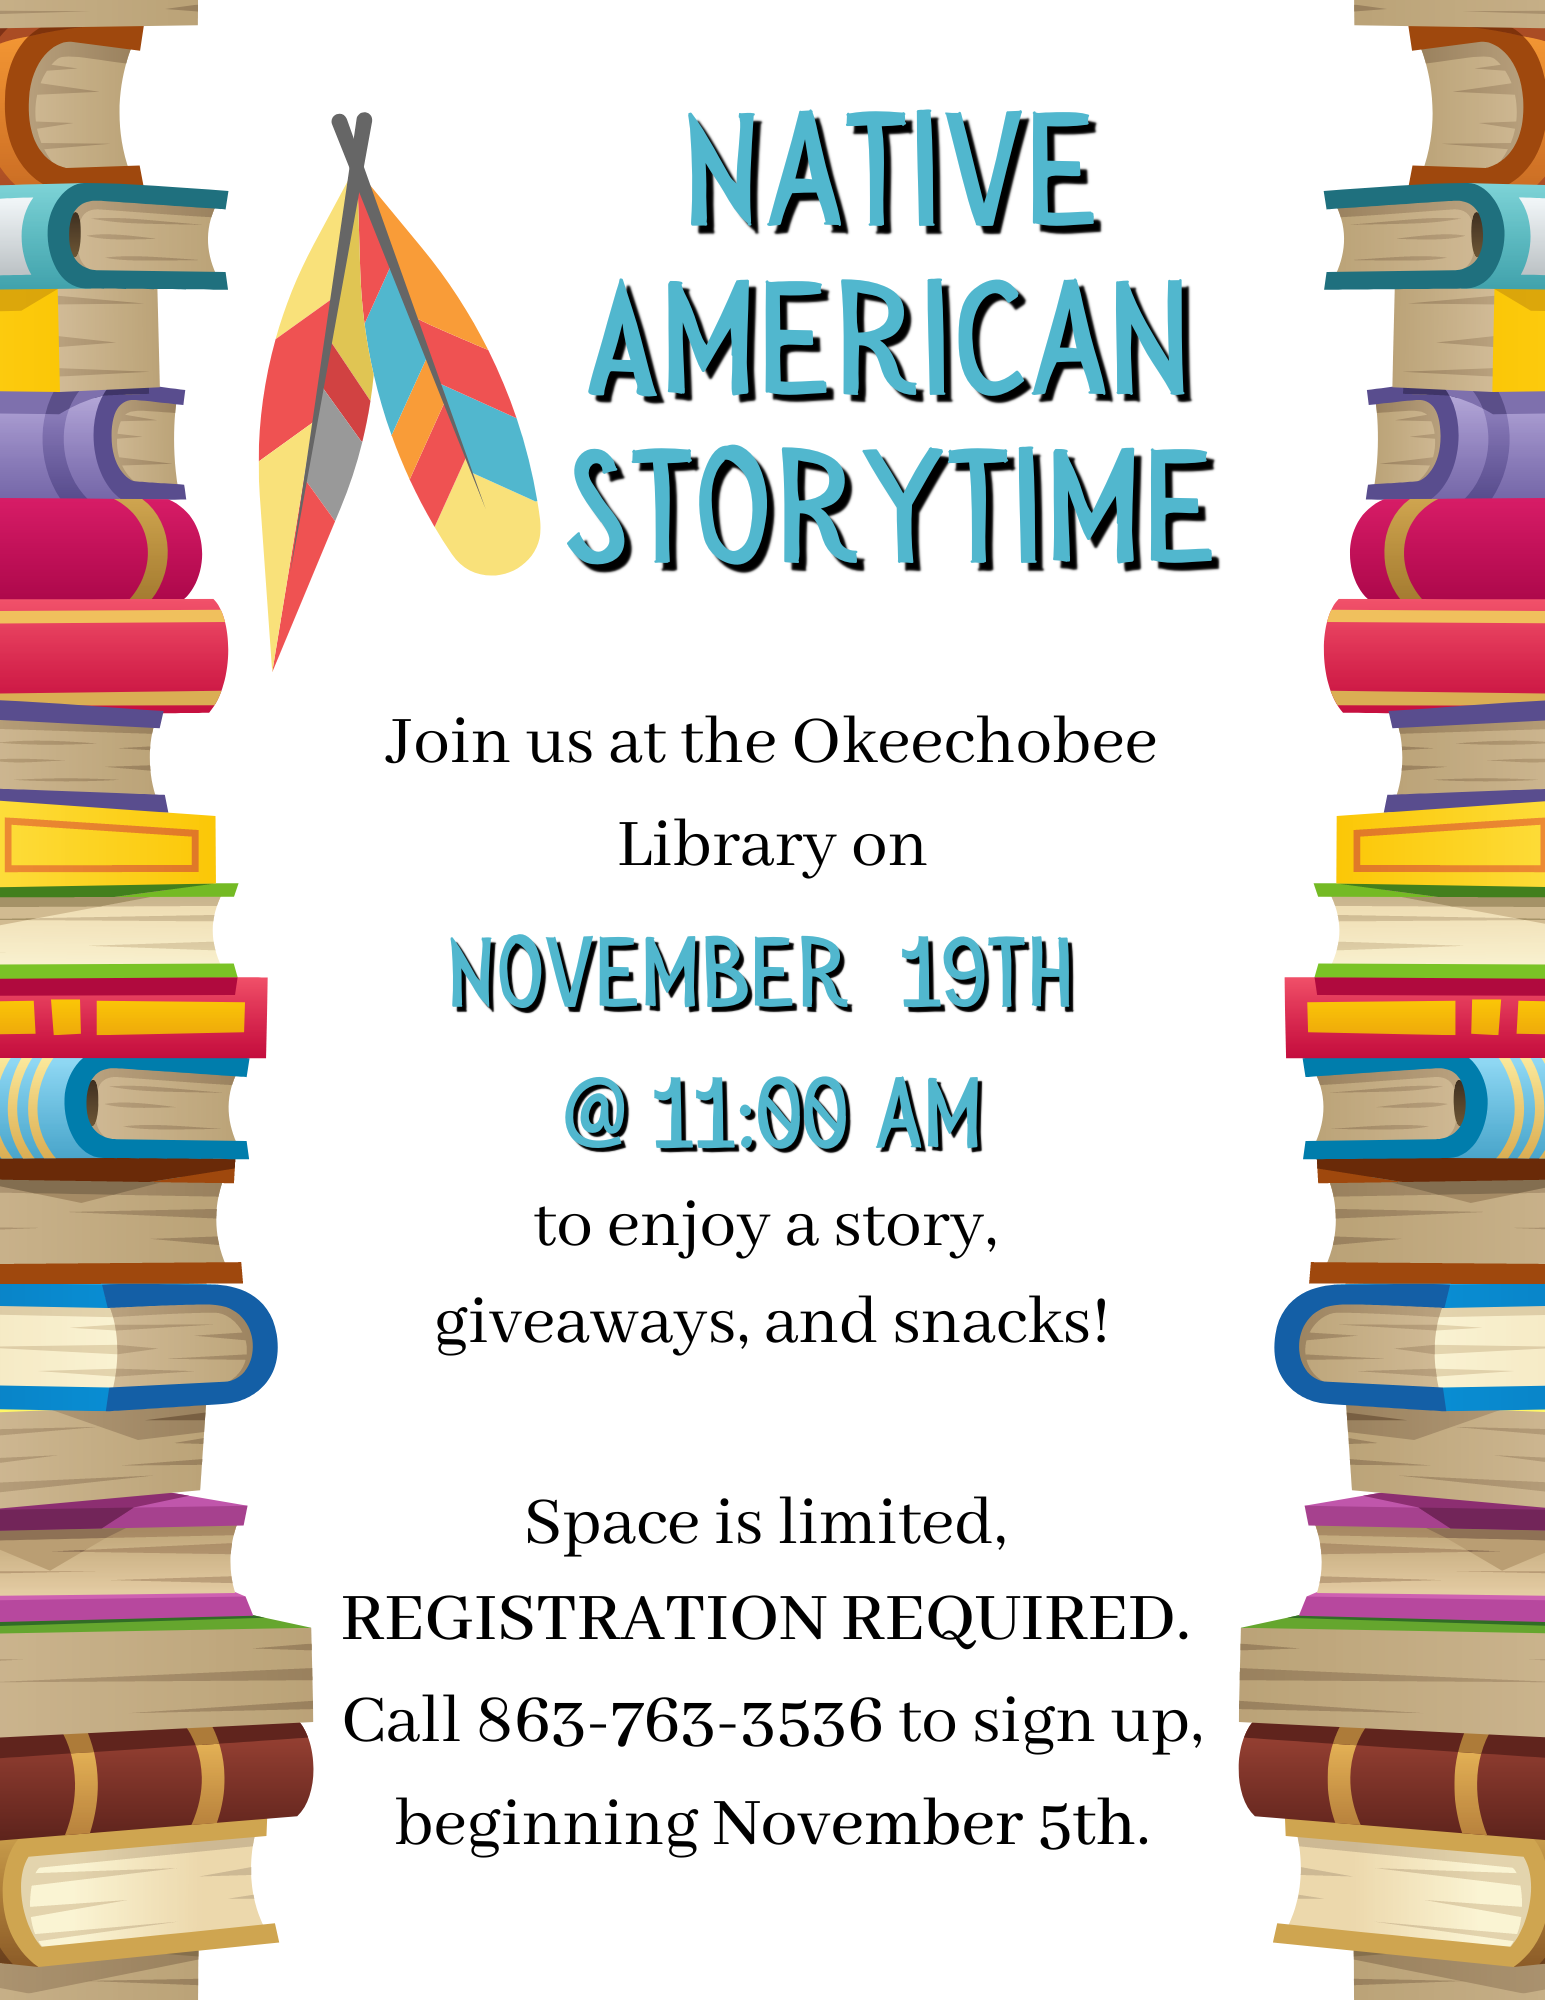 "Join us at the Okeechobee Library on Saturday, November 19th at 11am for our Native American Storytime!"